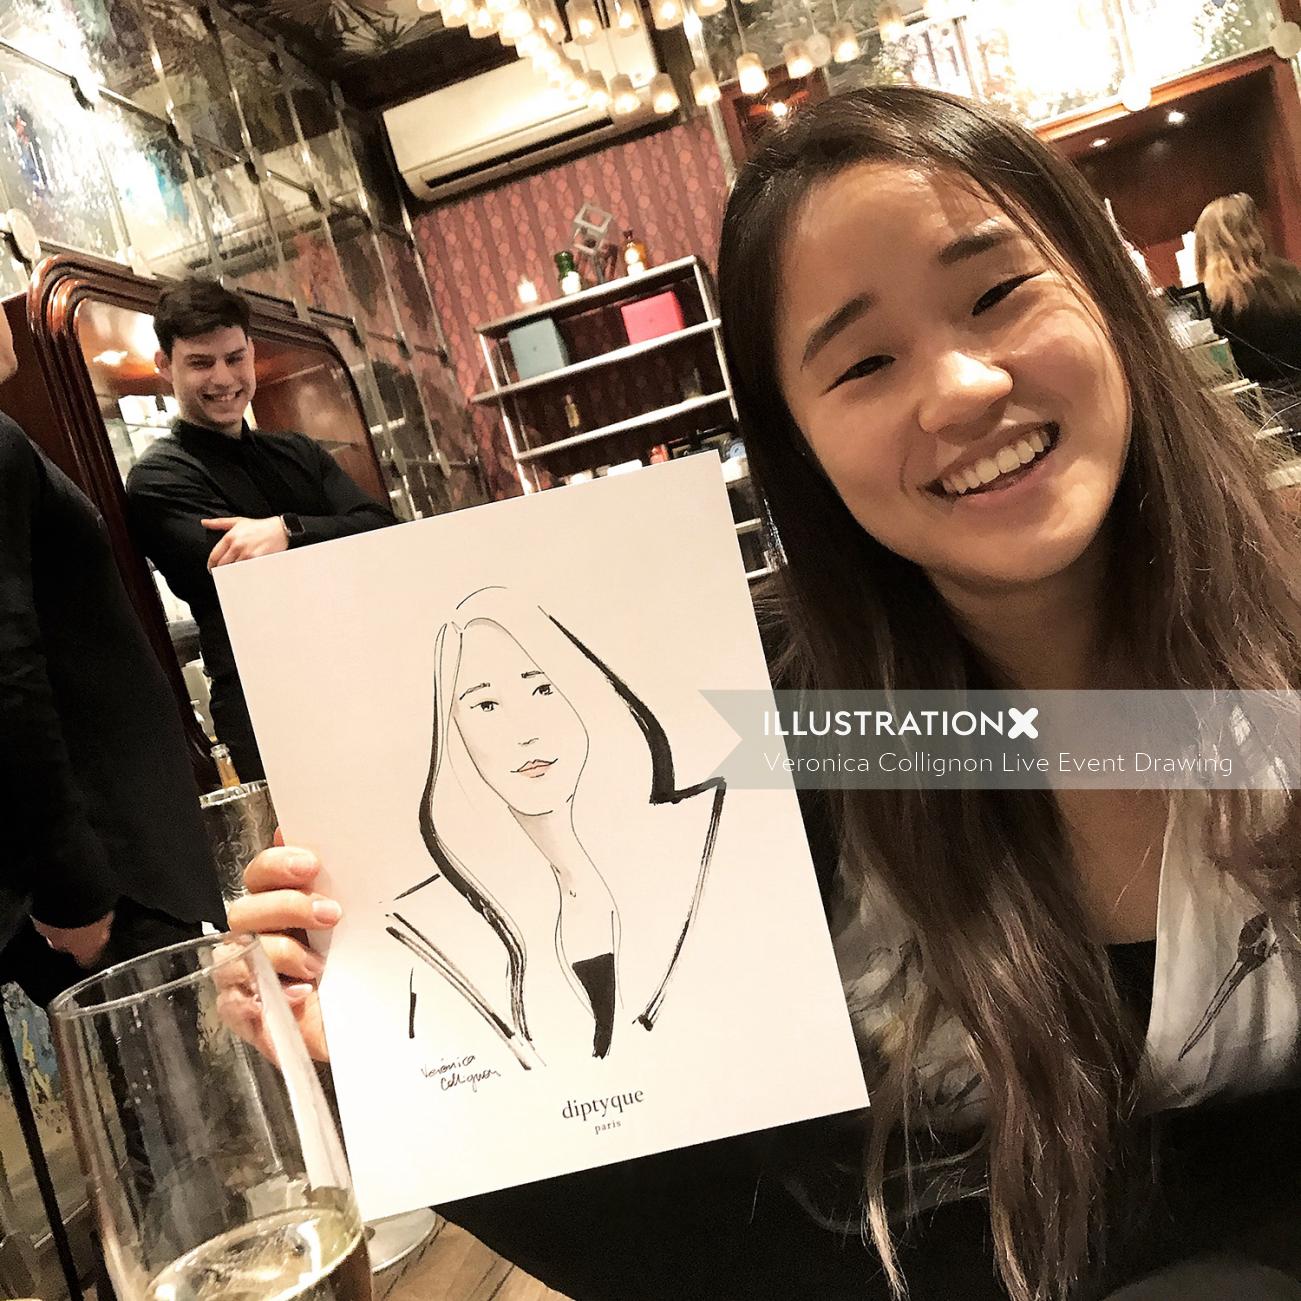 Live Event drawing smiley teenager sketch
